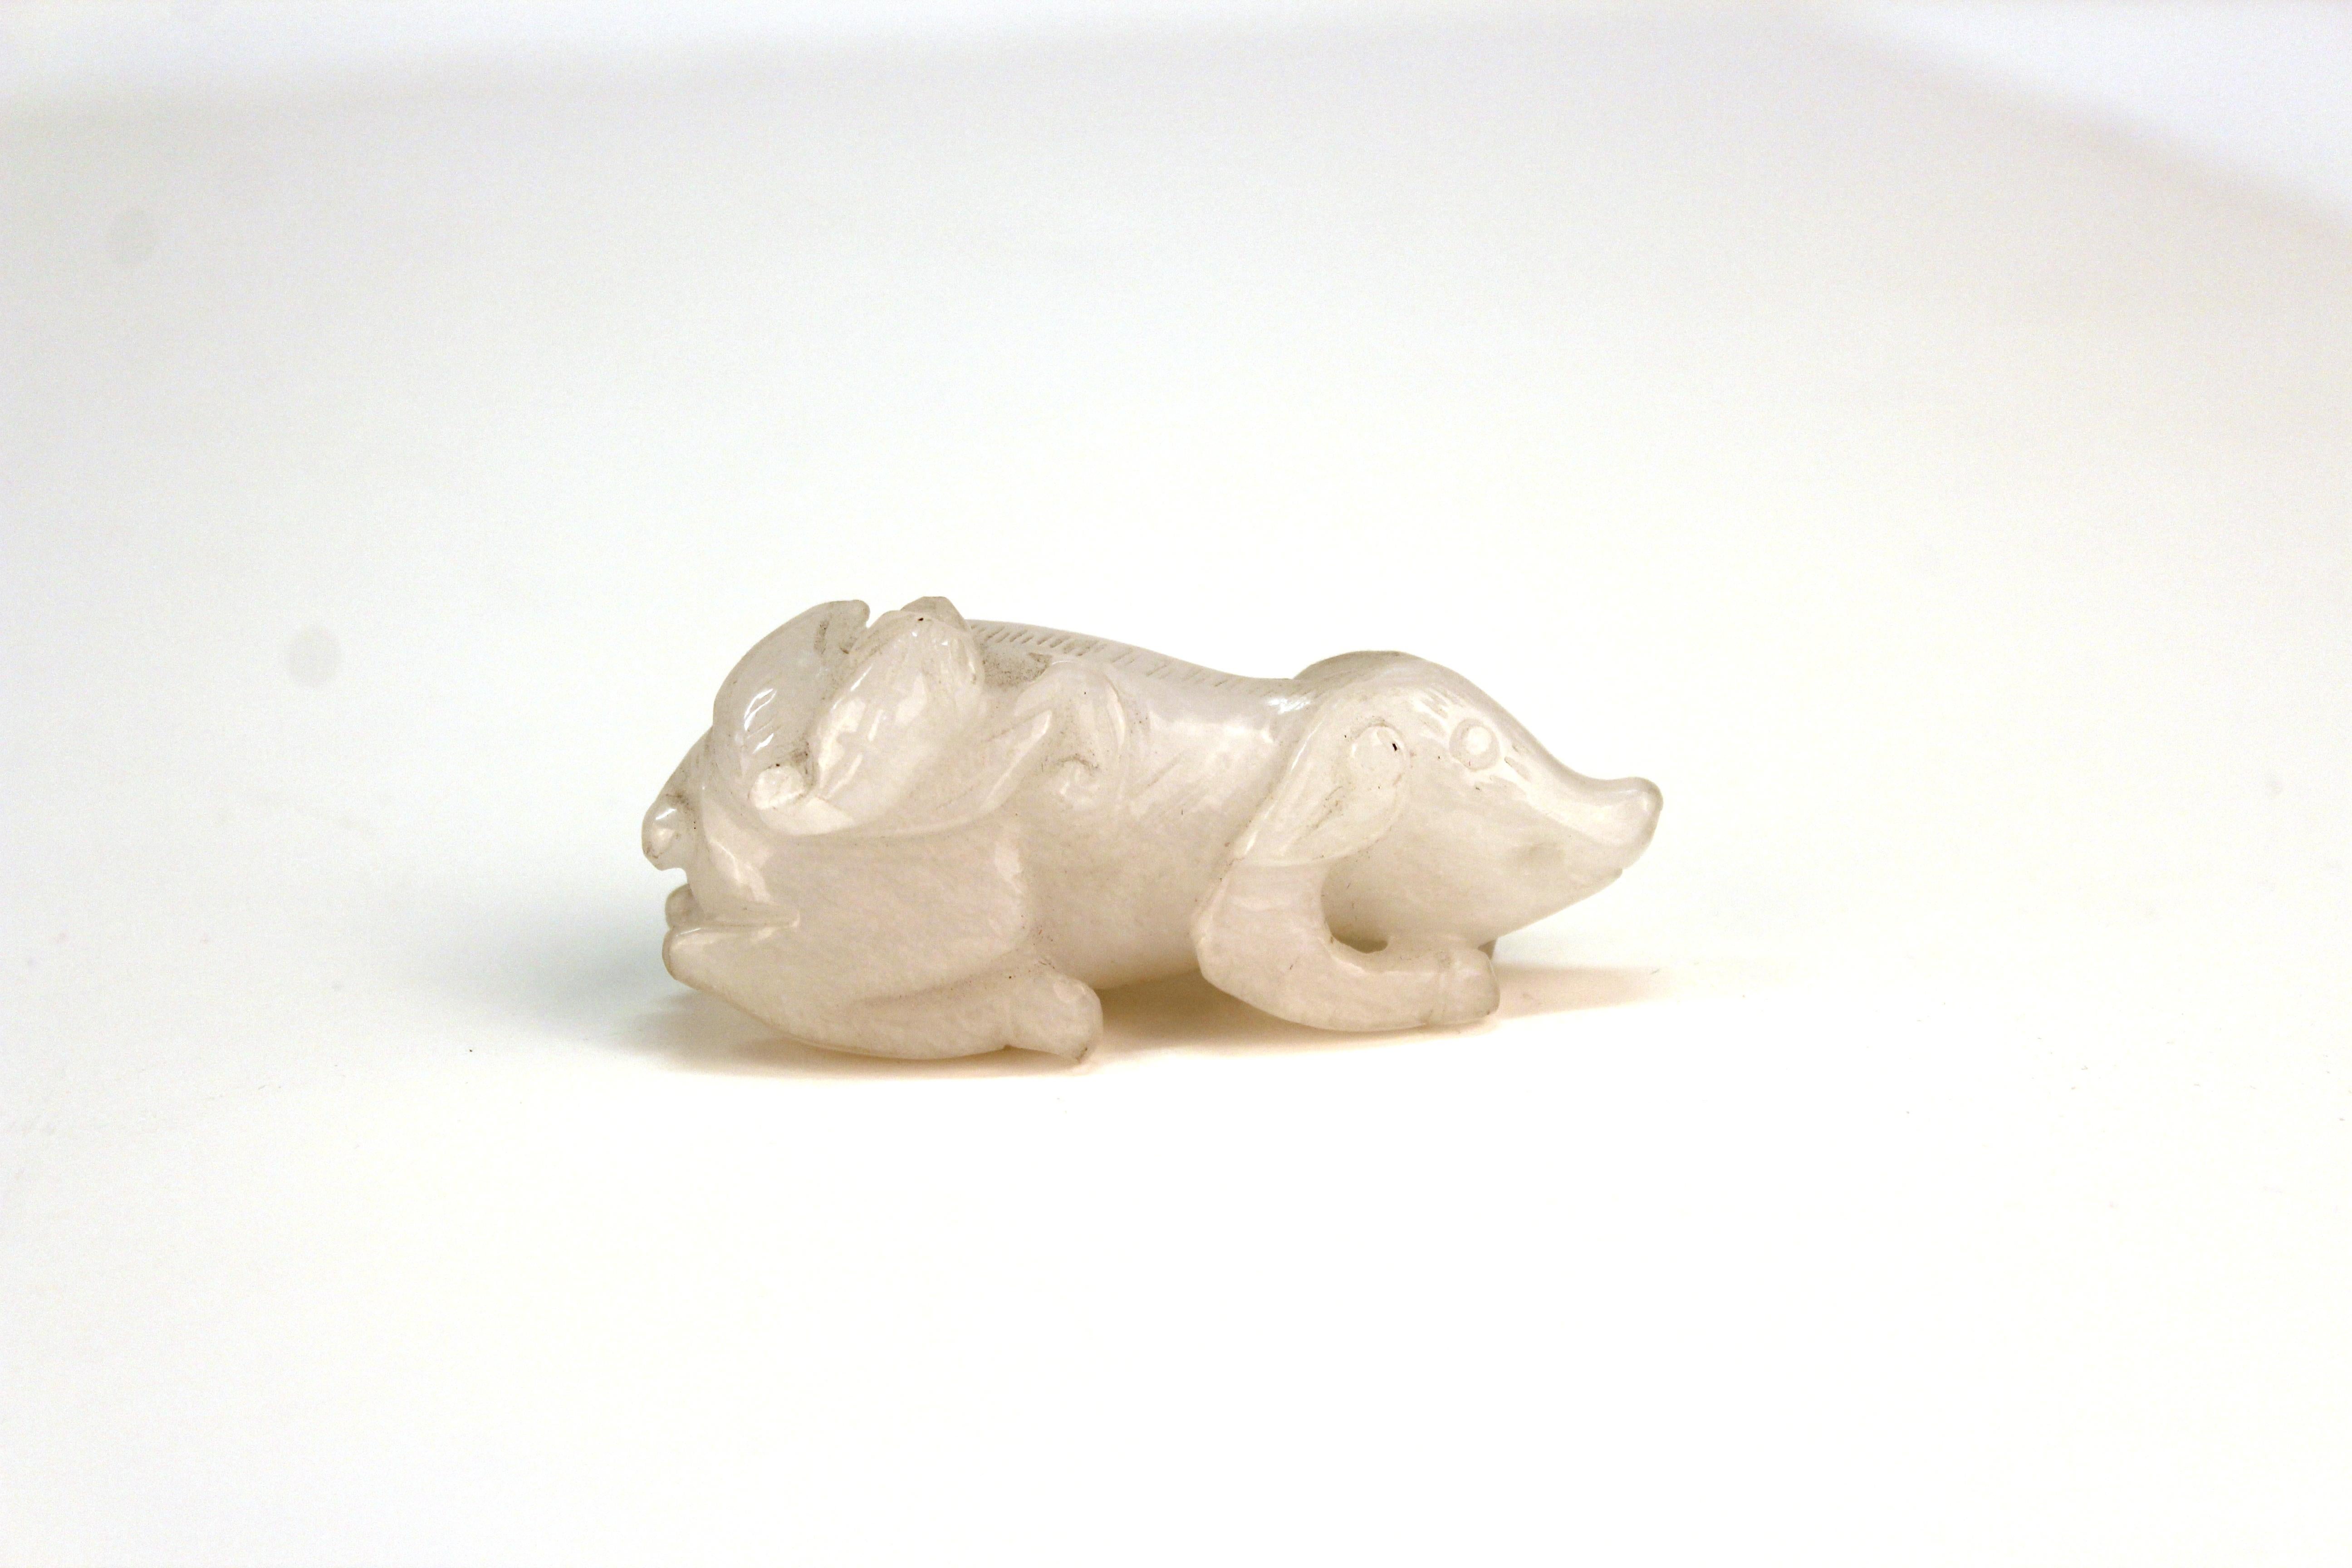 20th Century Chinese White Jadeite Sculpture of a Small Pig with Bat